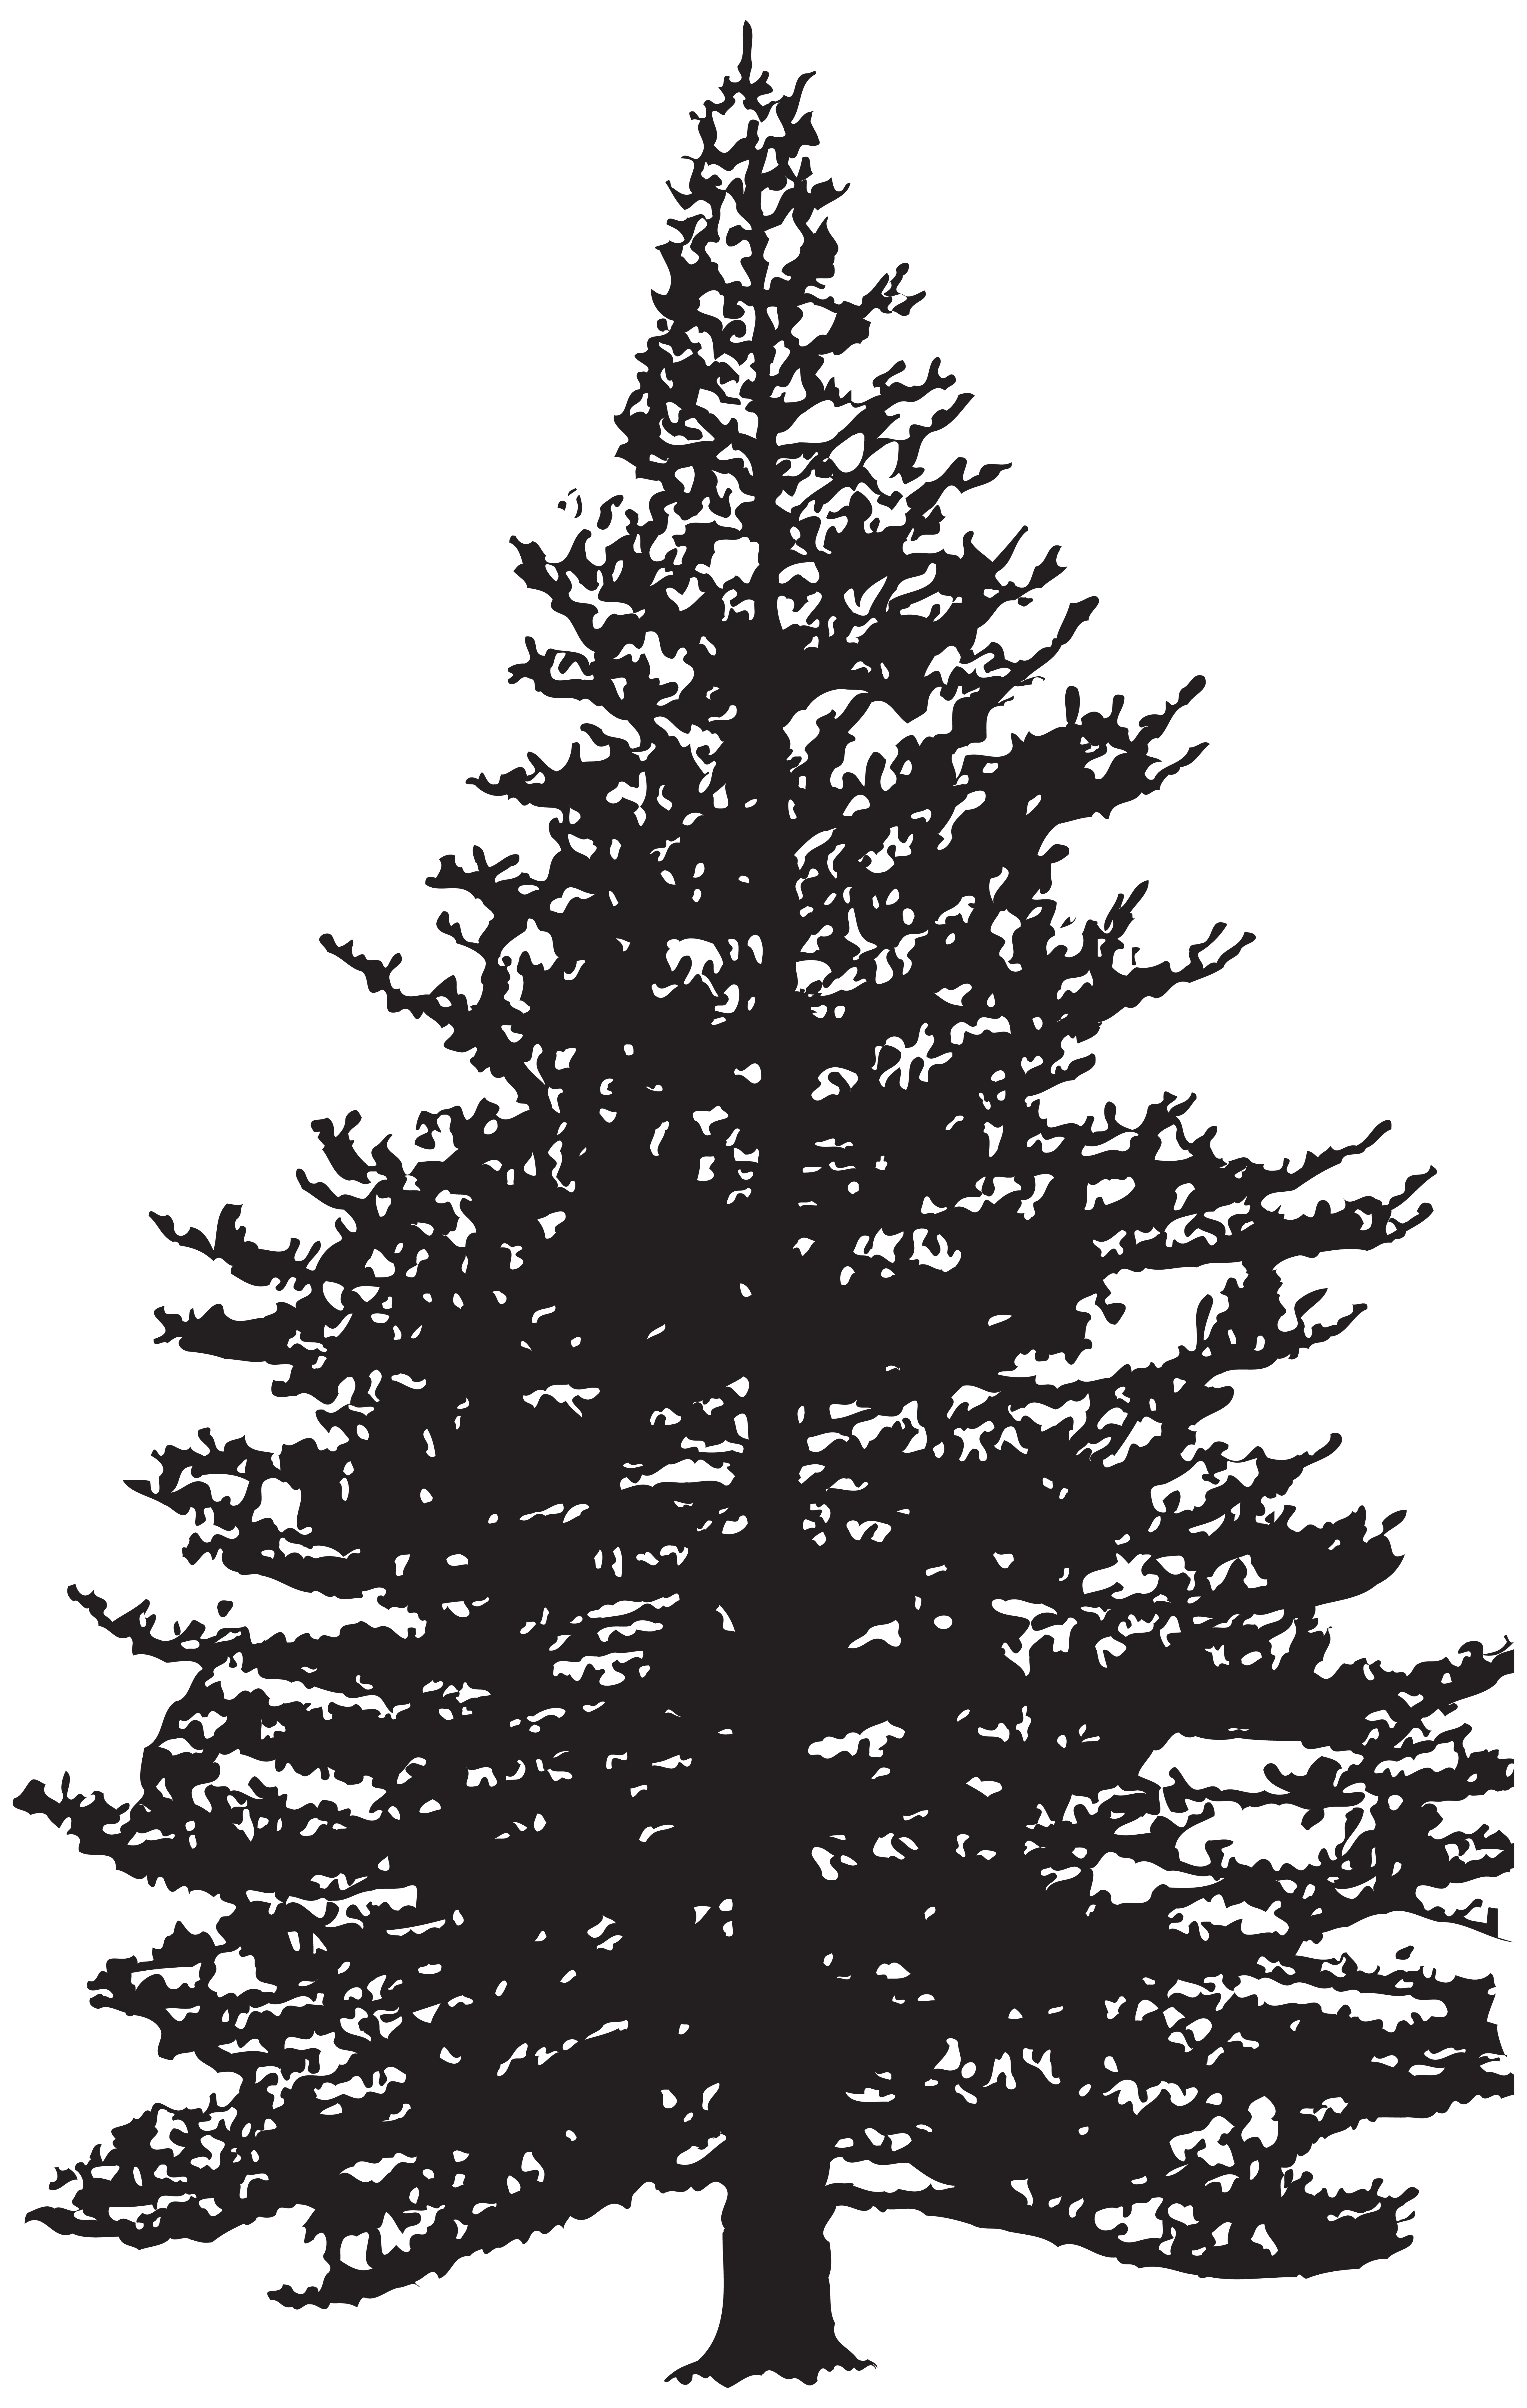 Clip art Fir Drawing Pine Image - tree png download - 5074*8000 - Free